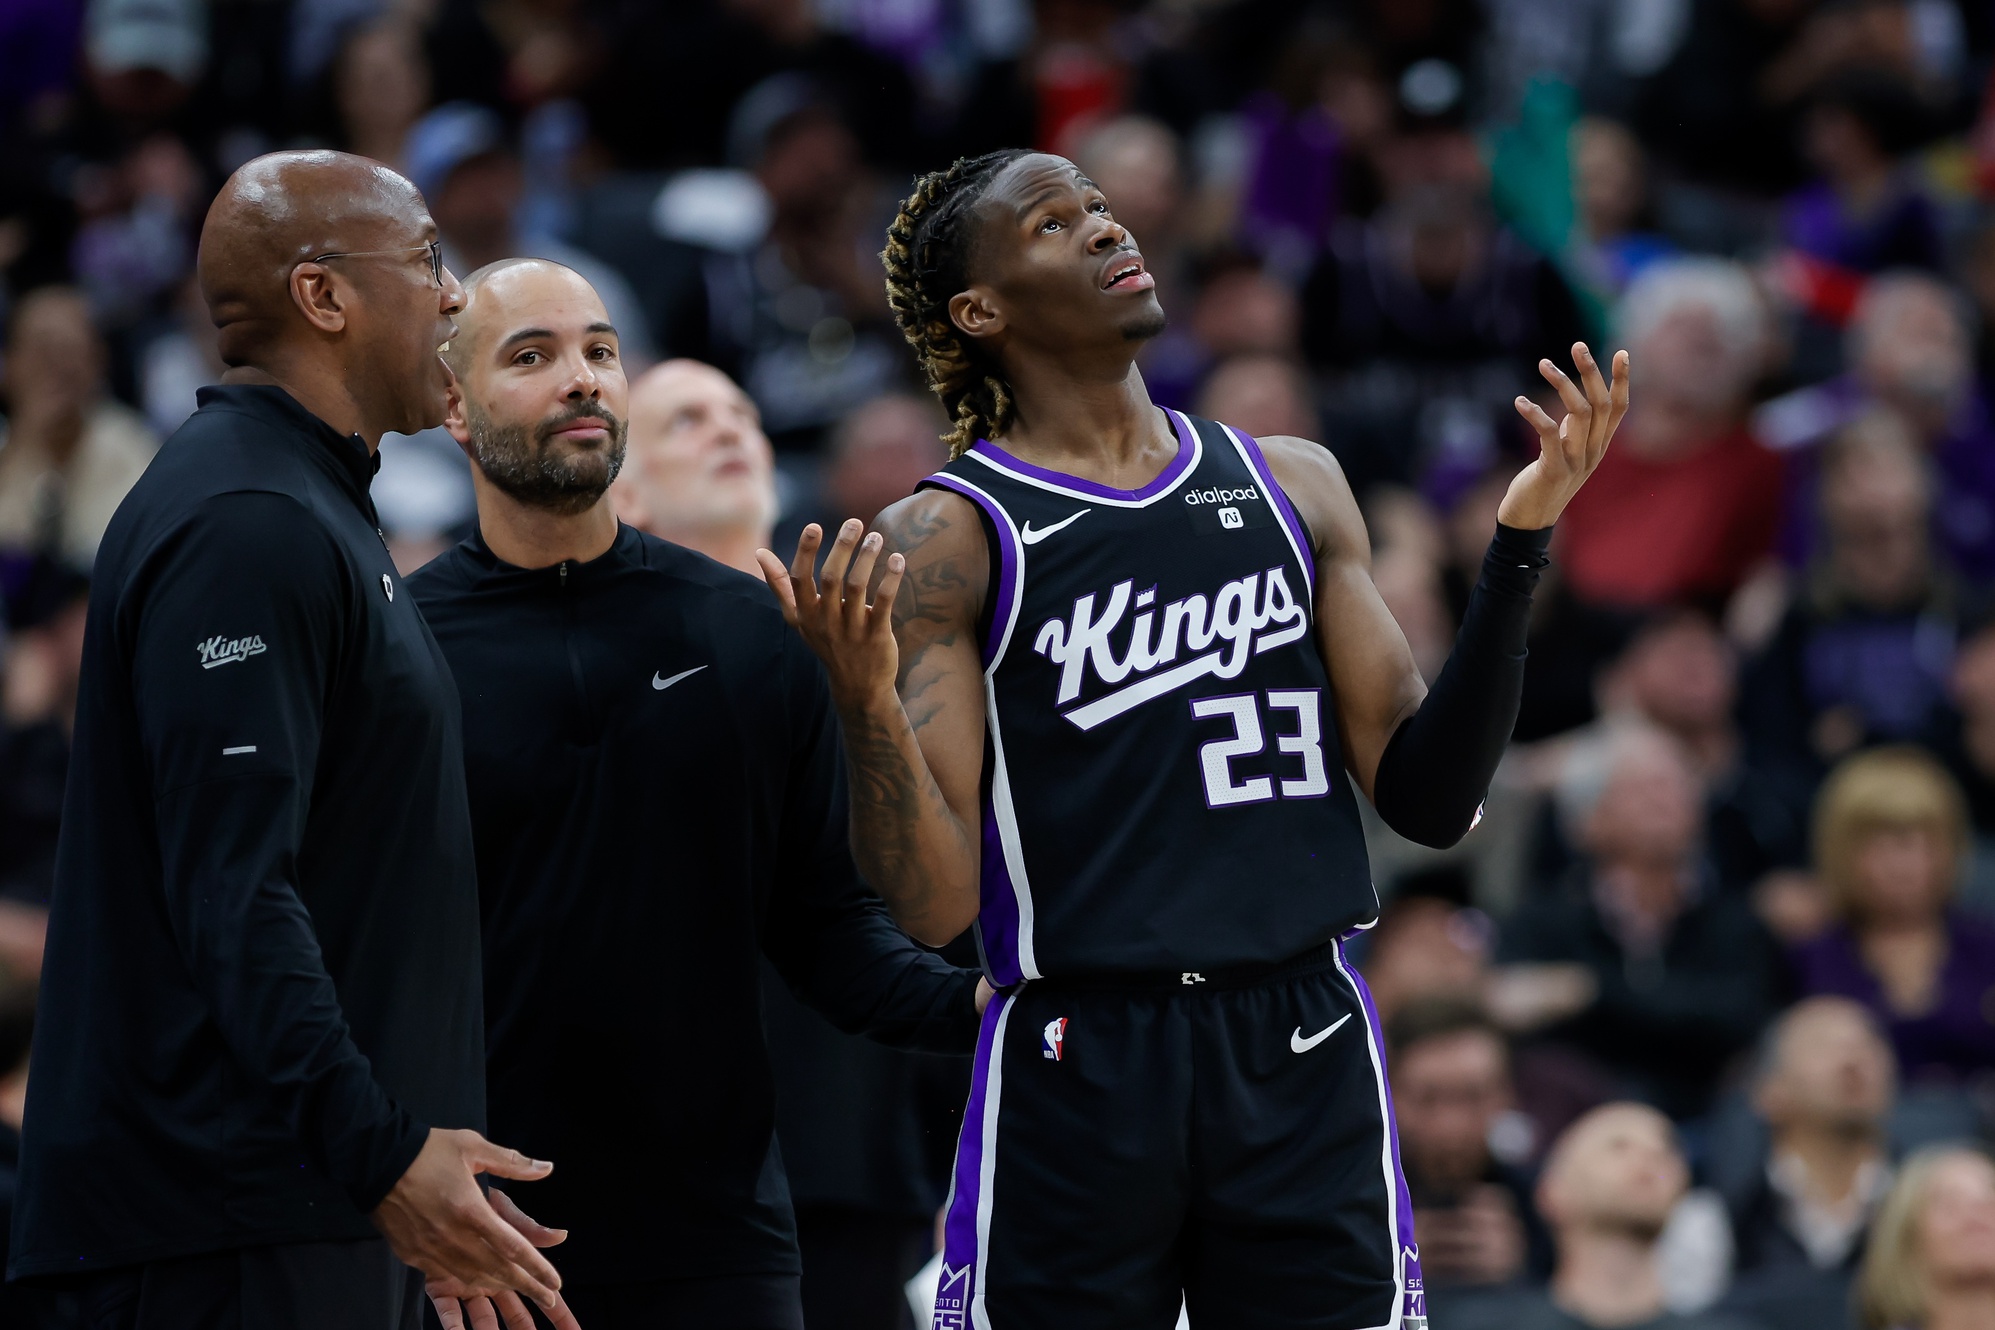 Sacramento Kings guard Keon Ellis (23) reviews a call with head coach Mike Brown during the second quarter against the Philadelphia 76ers at Golden 1 Center.